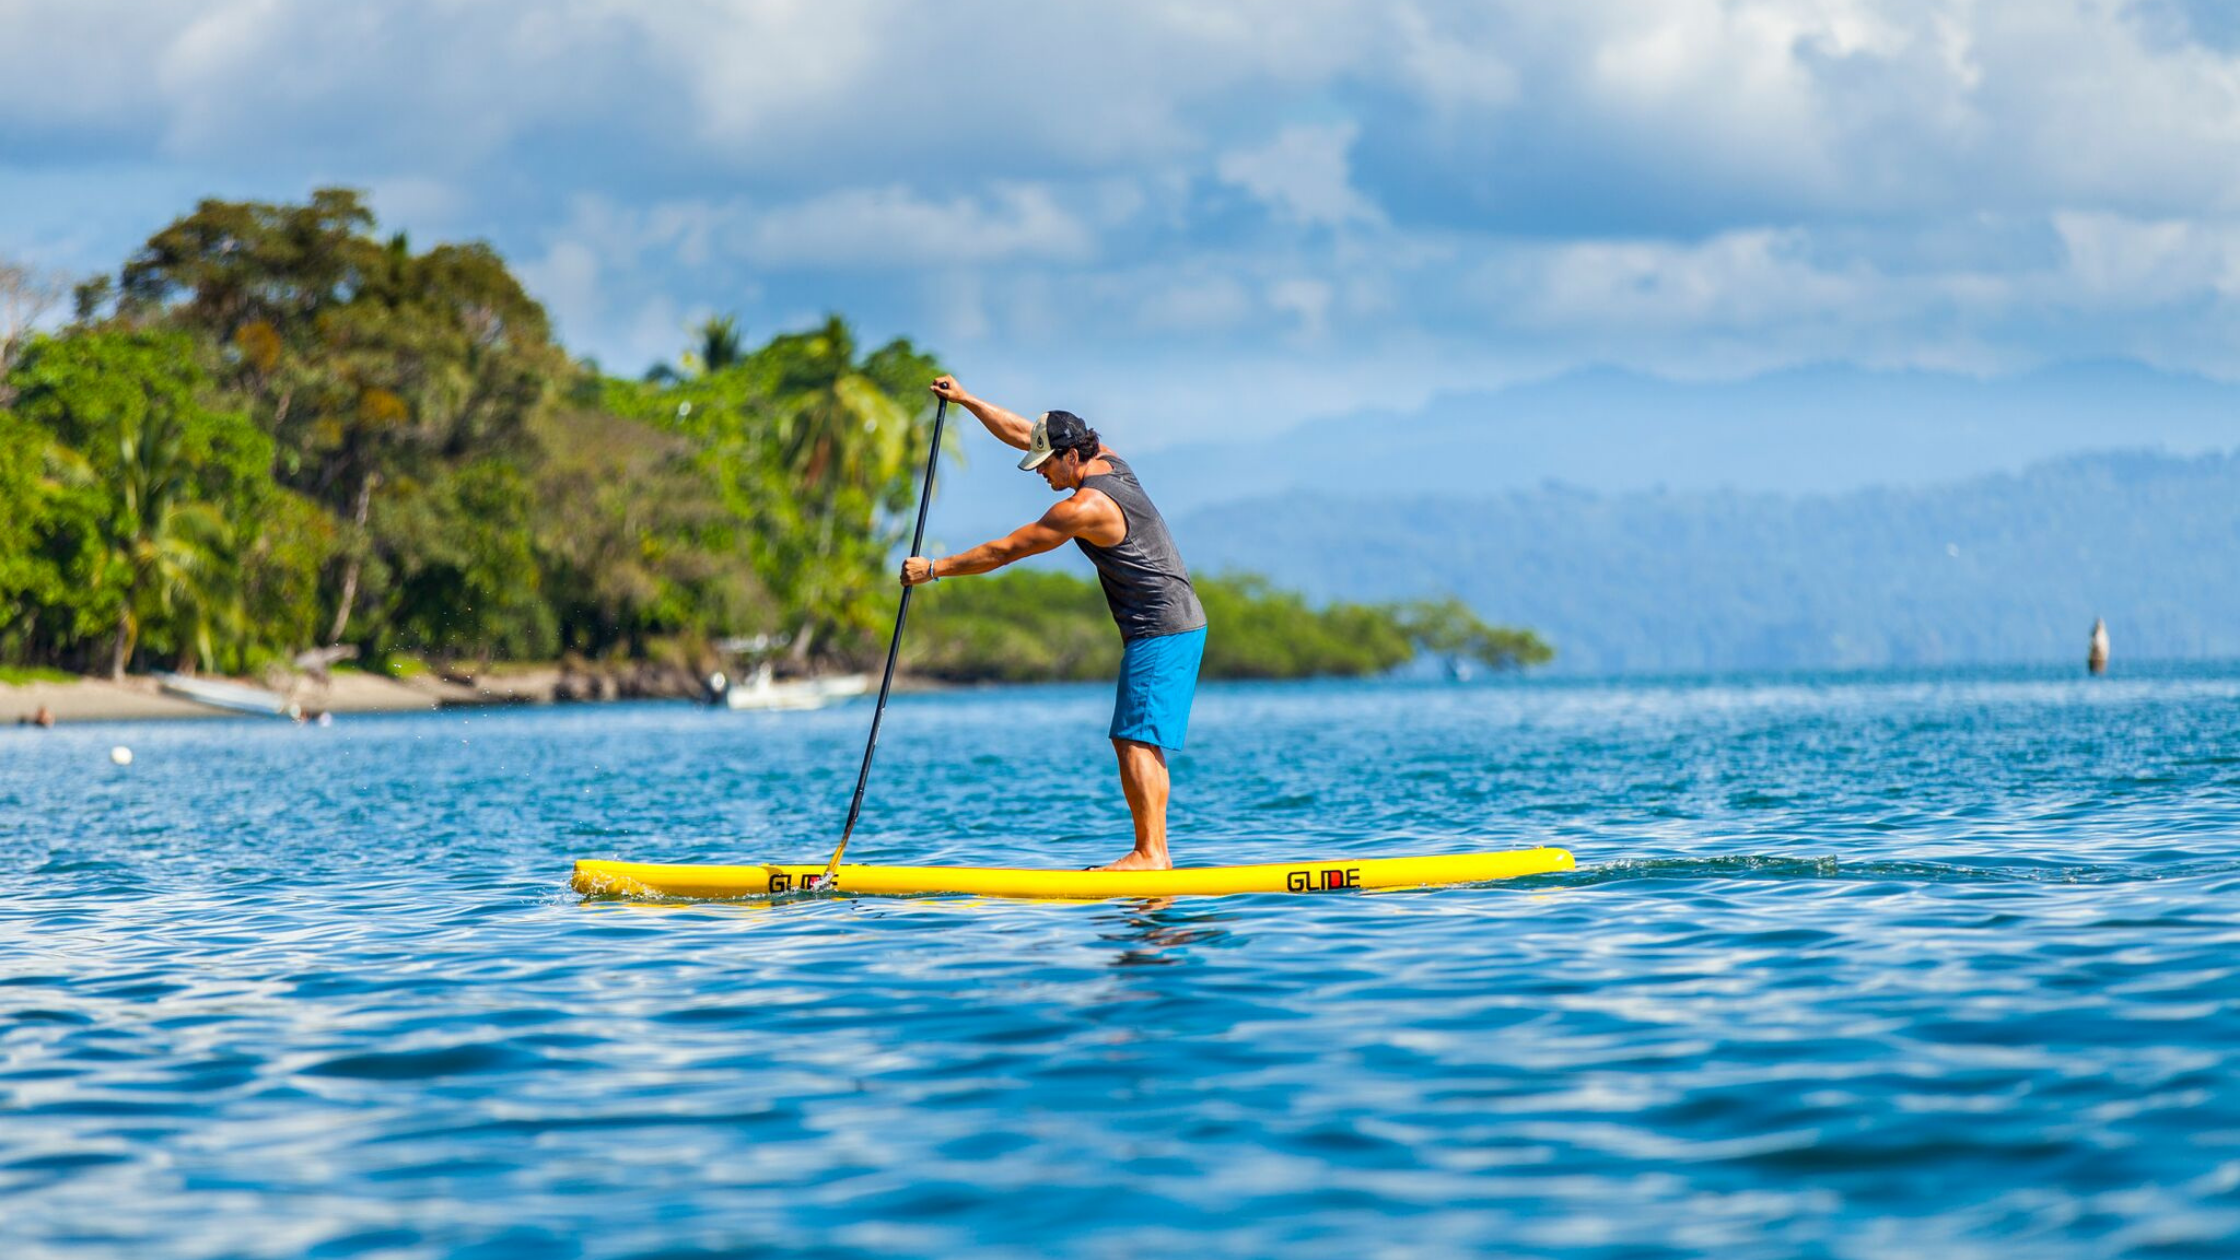 Glide stand up paddle board